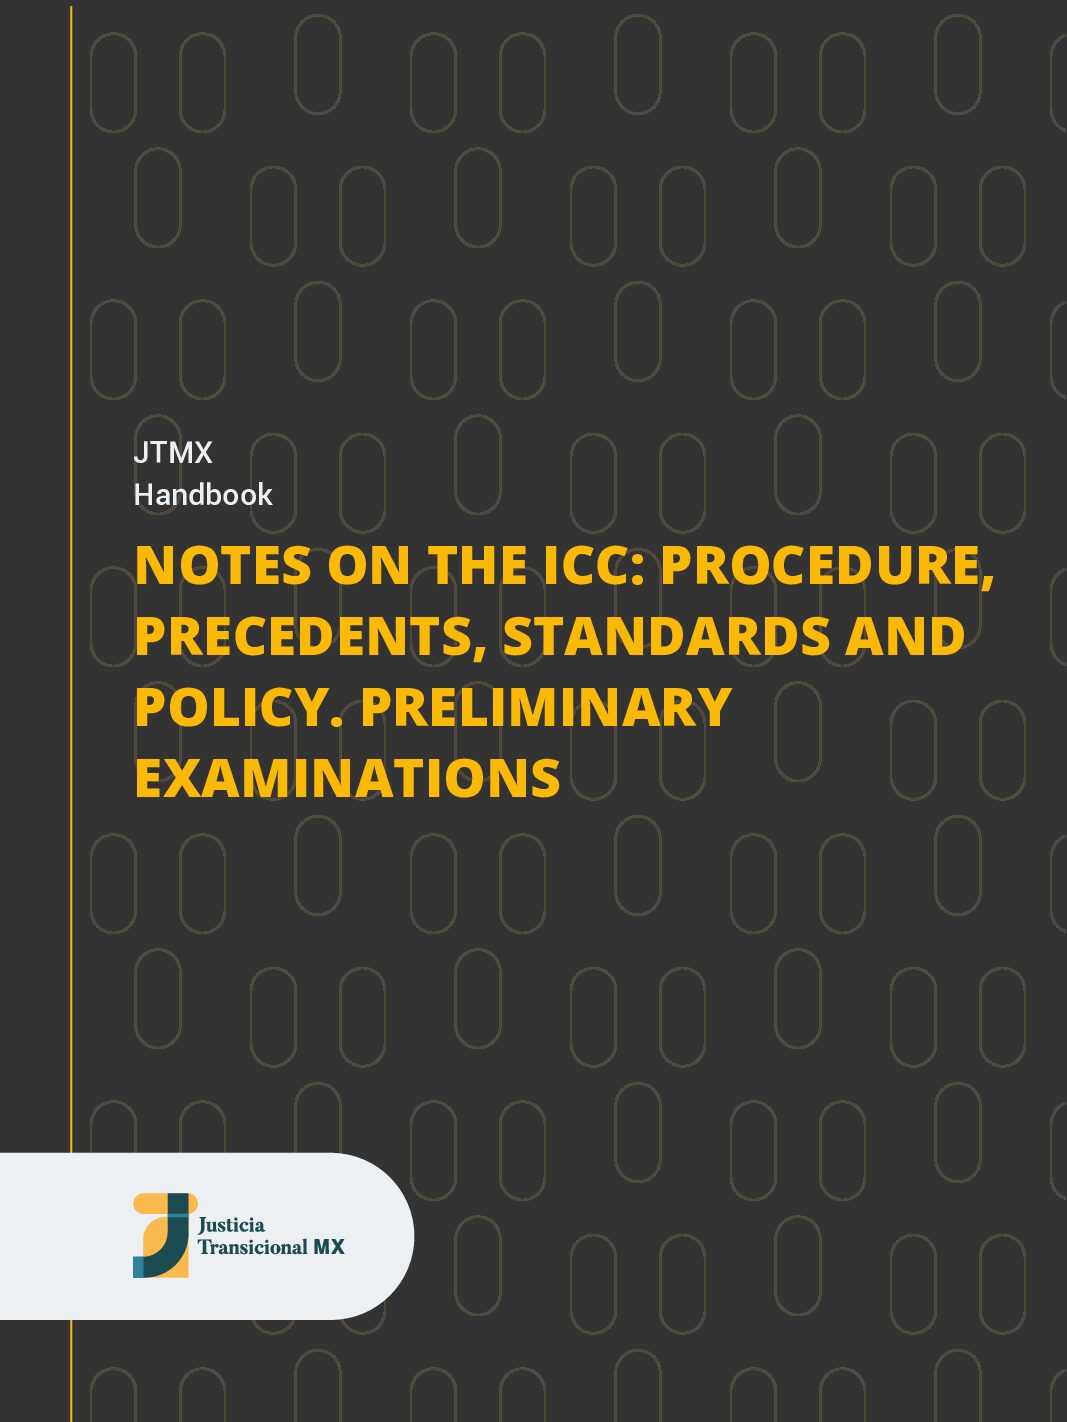 Notes on the ICC: procedure, precedents, standards and policy. Preliminary examinations